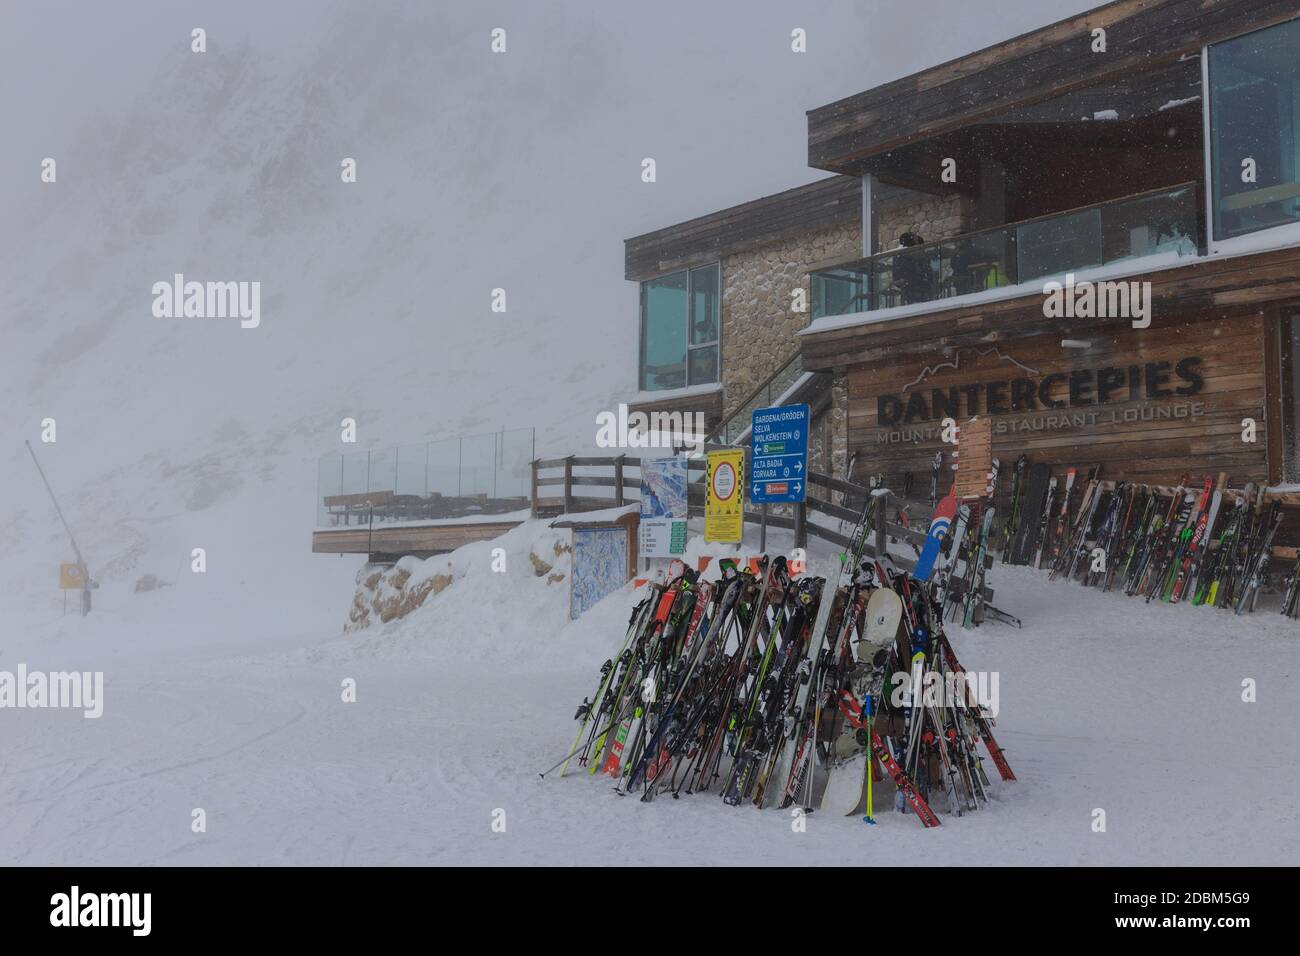 A group of skis piled up outside Danterpieces restaurant on a foggy day, Val Gardena, Dolomites, Italy Stock Photo